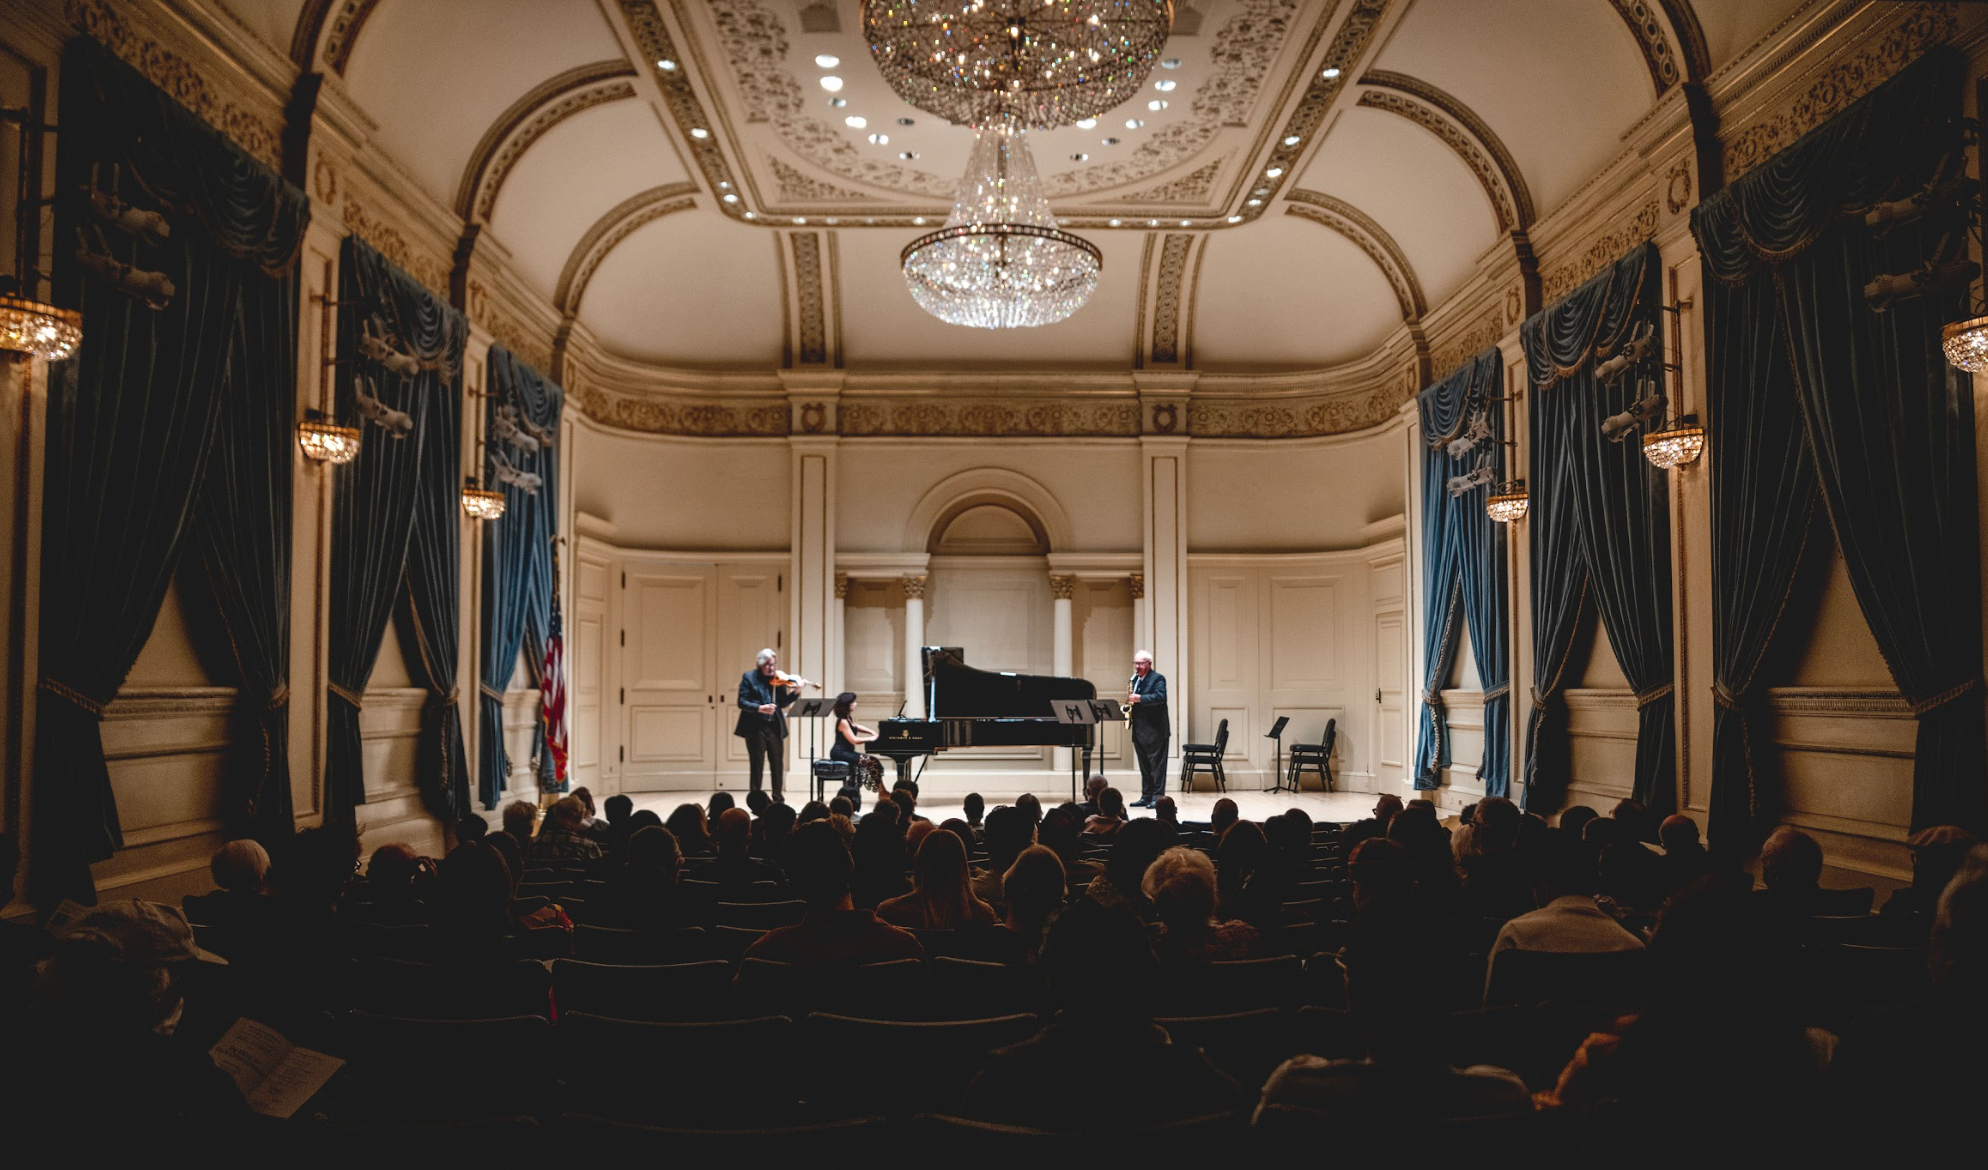 Distinguished Concerts International New York (DCINY) presents The Music of Dinos Constantinides in Review